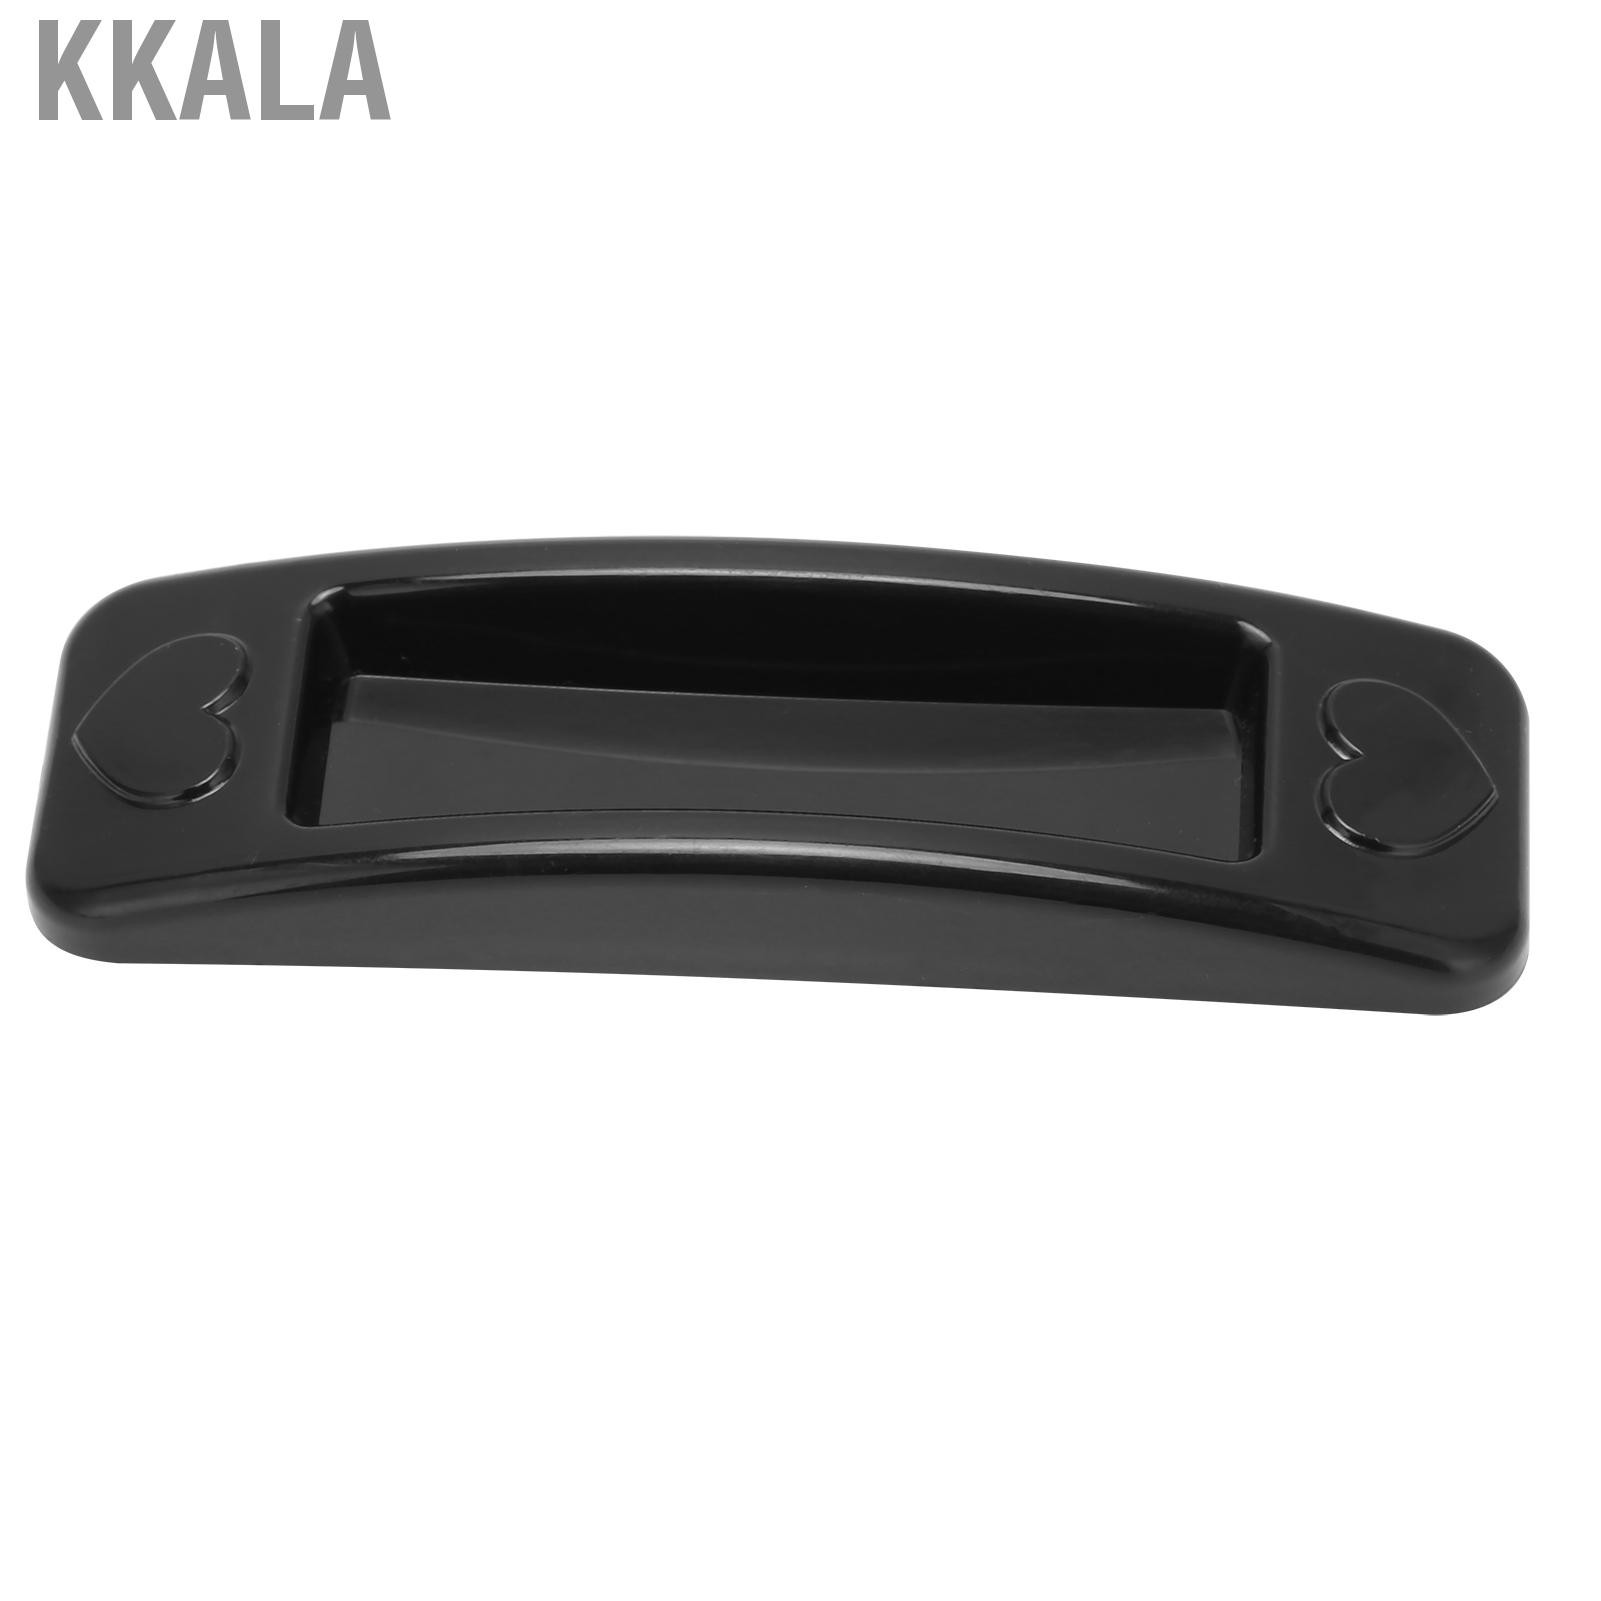 Kkala 4pcs Black No‑Drill Sliding Door Handle Pasted Plastic for Home Cabinet Drawer